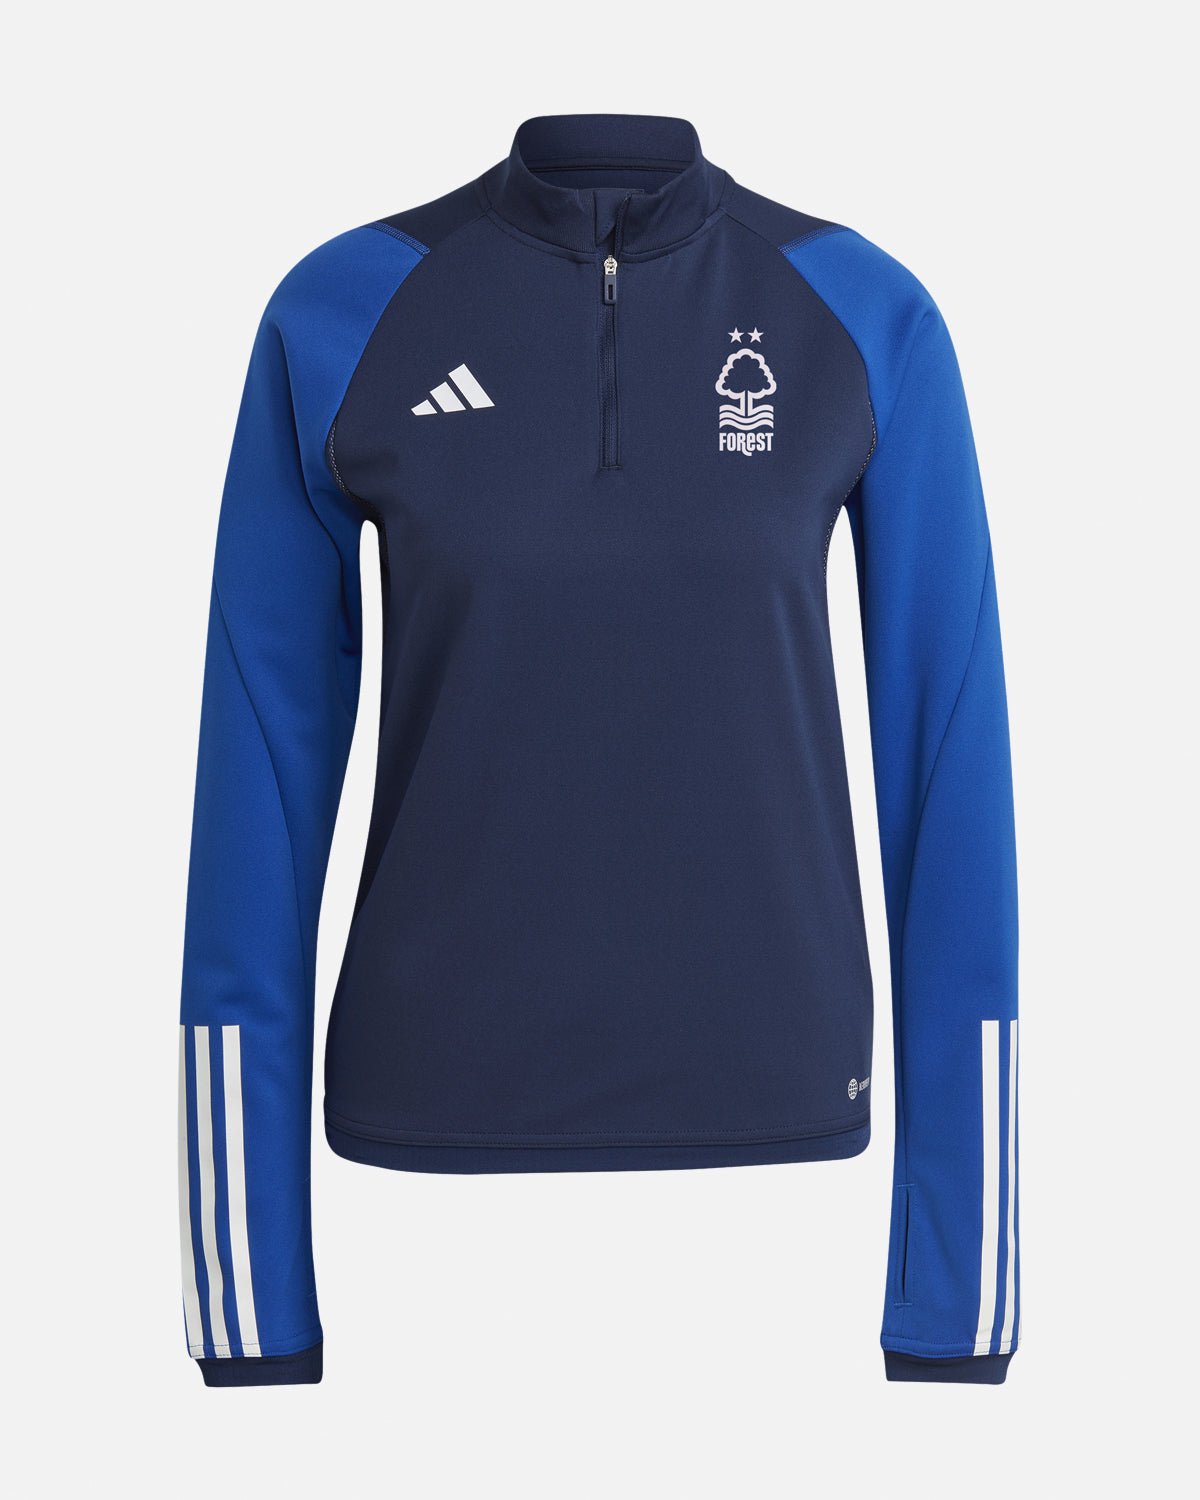 NFFC Women's Navy Training Top 23-24 - Nottingham Forest FC